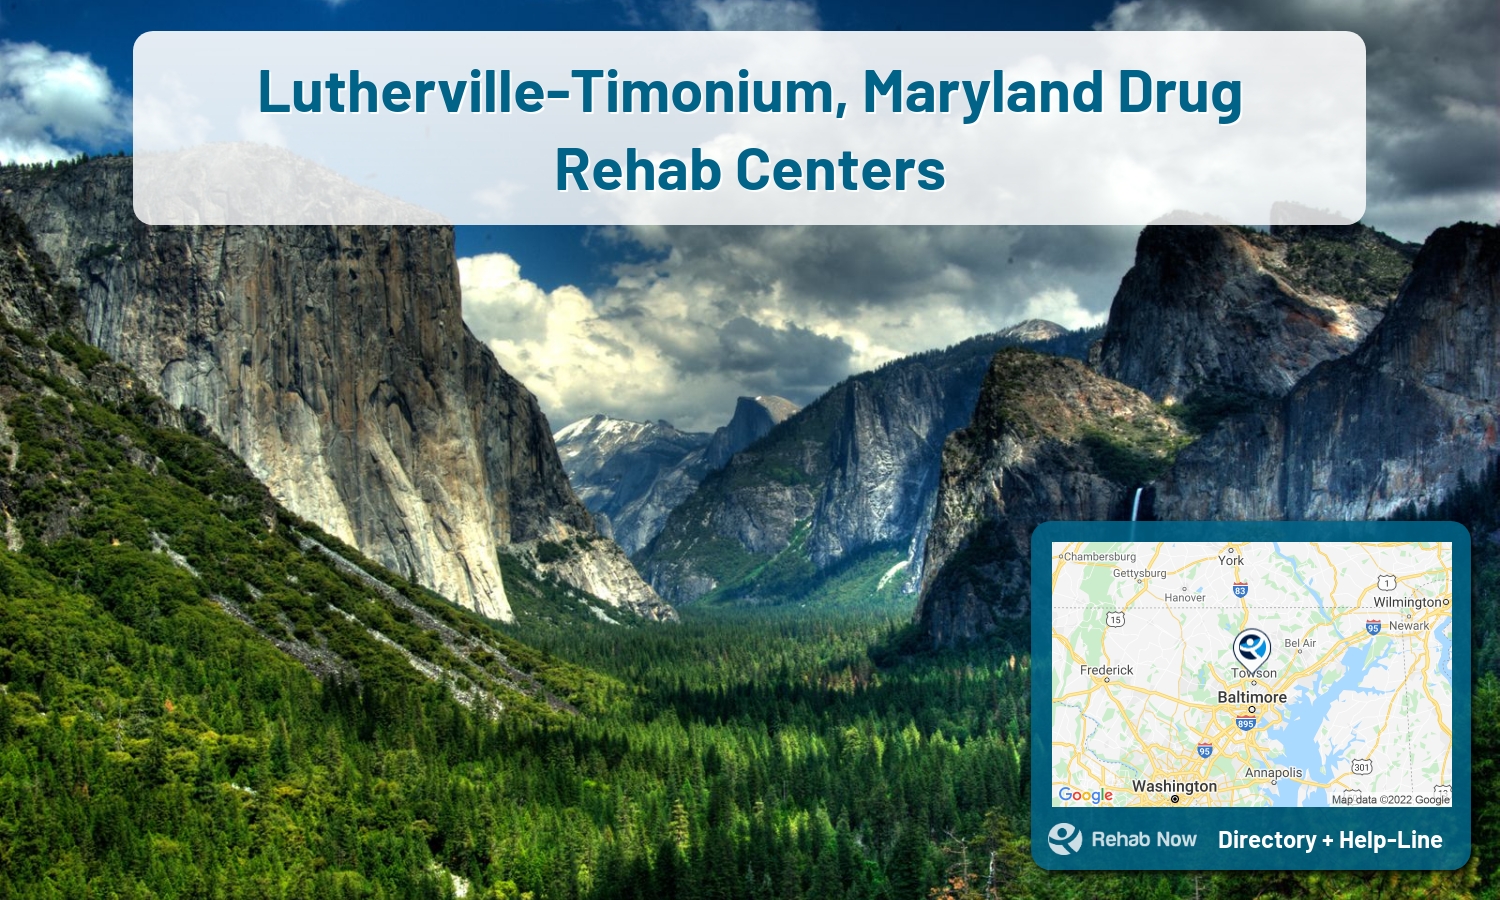 Struggling with addiction in Lutherville-Timonium, Maryland? RehabNow helps you find the best treatment center or rehab available.